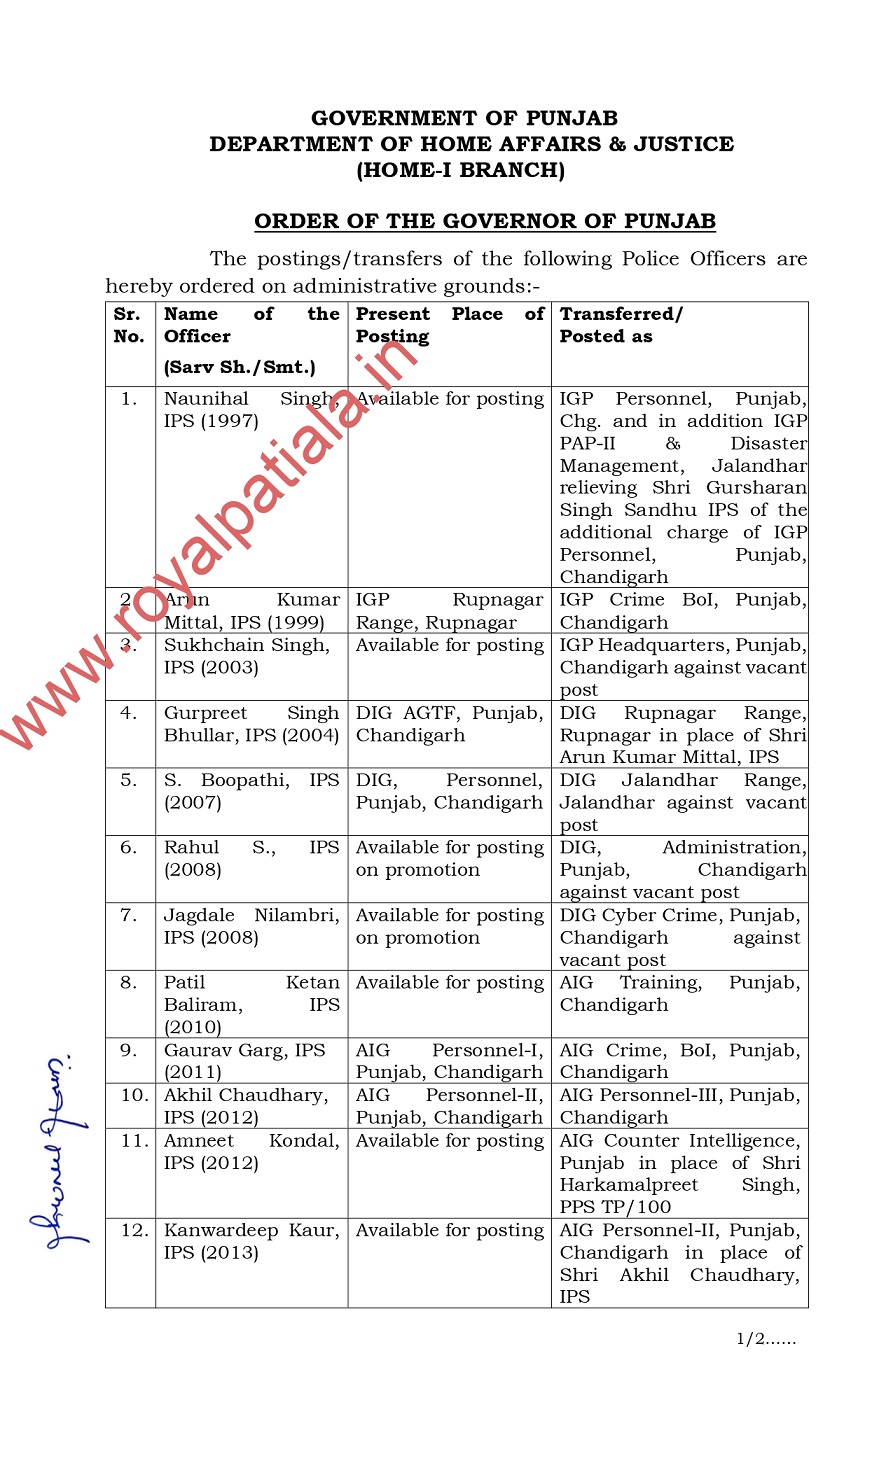 18 IPS-PPS transferred in Punjab